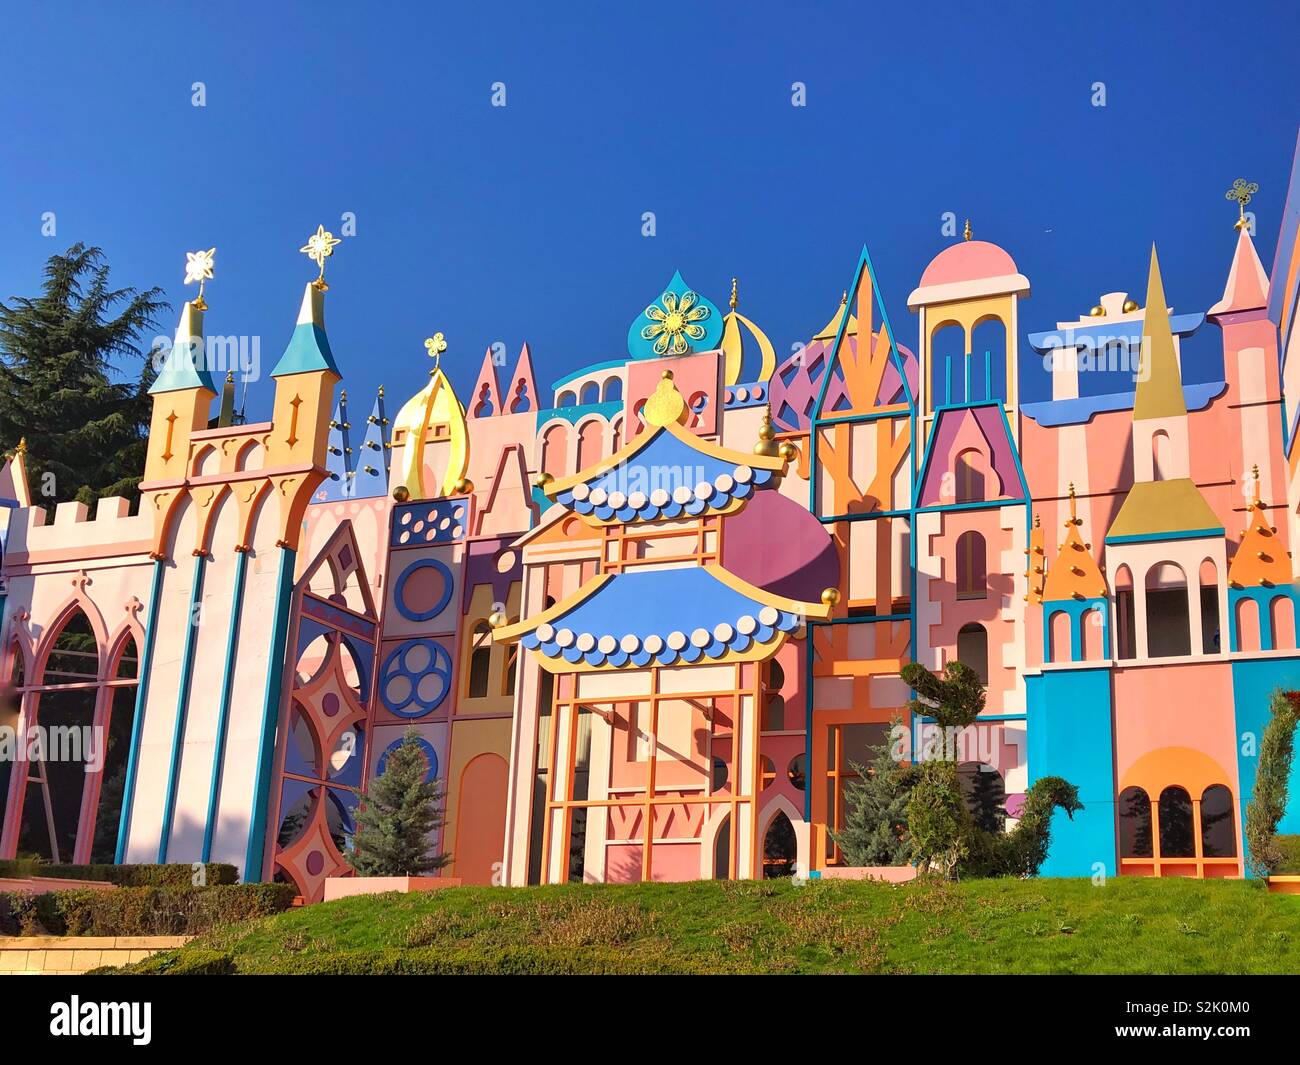 Facade of the ‘It’s a small world’ ride at Disneyland Paris Stock Photo